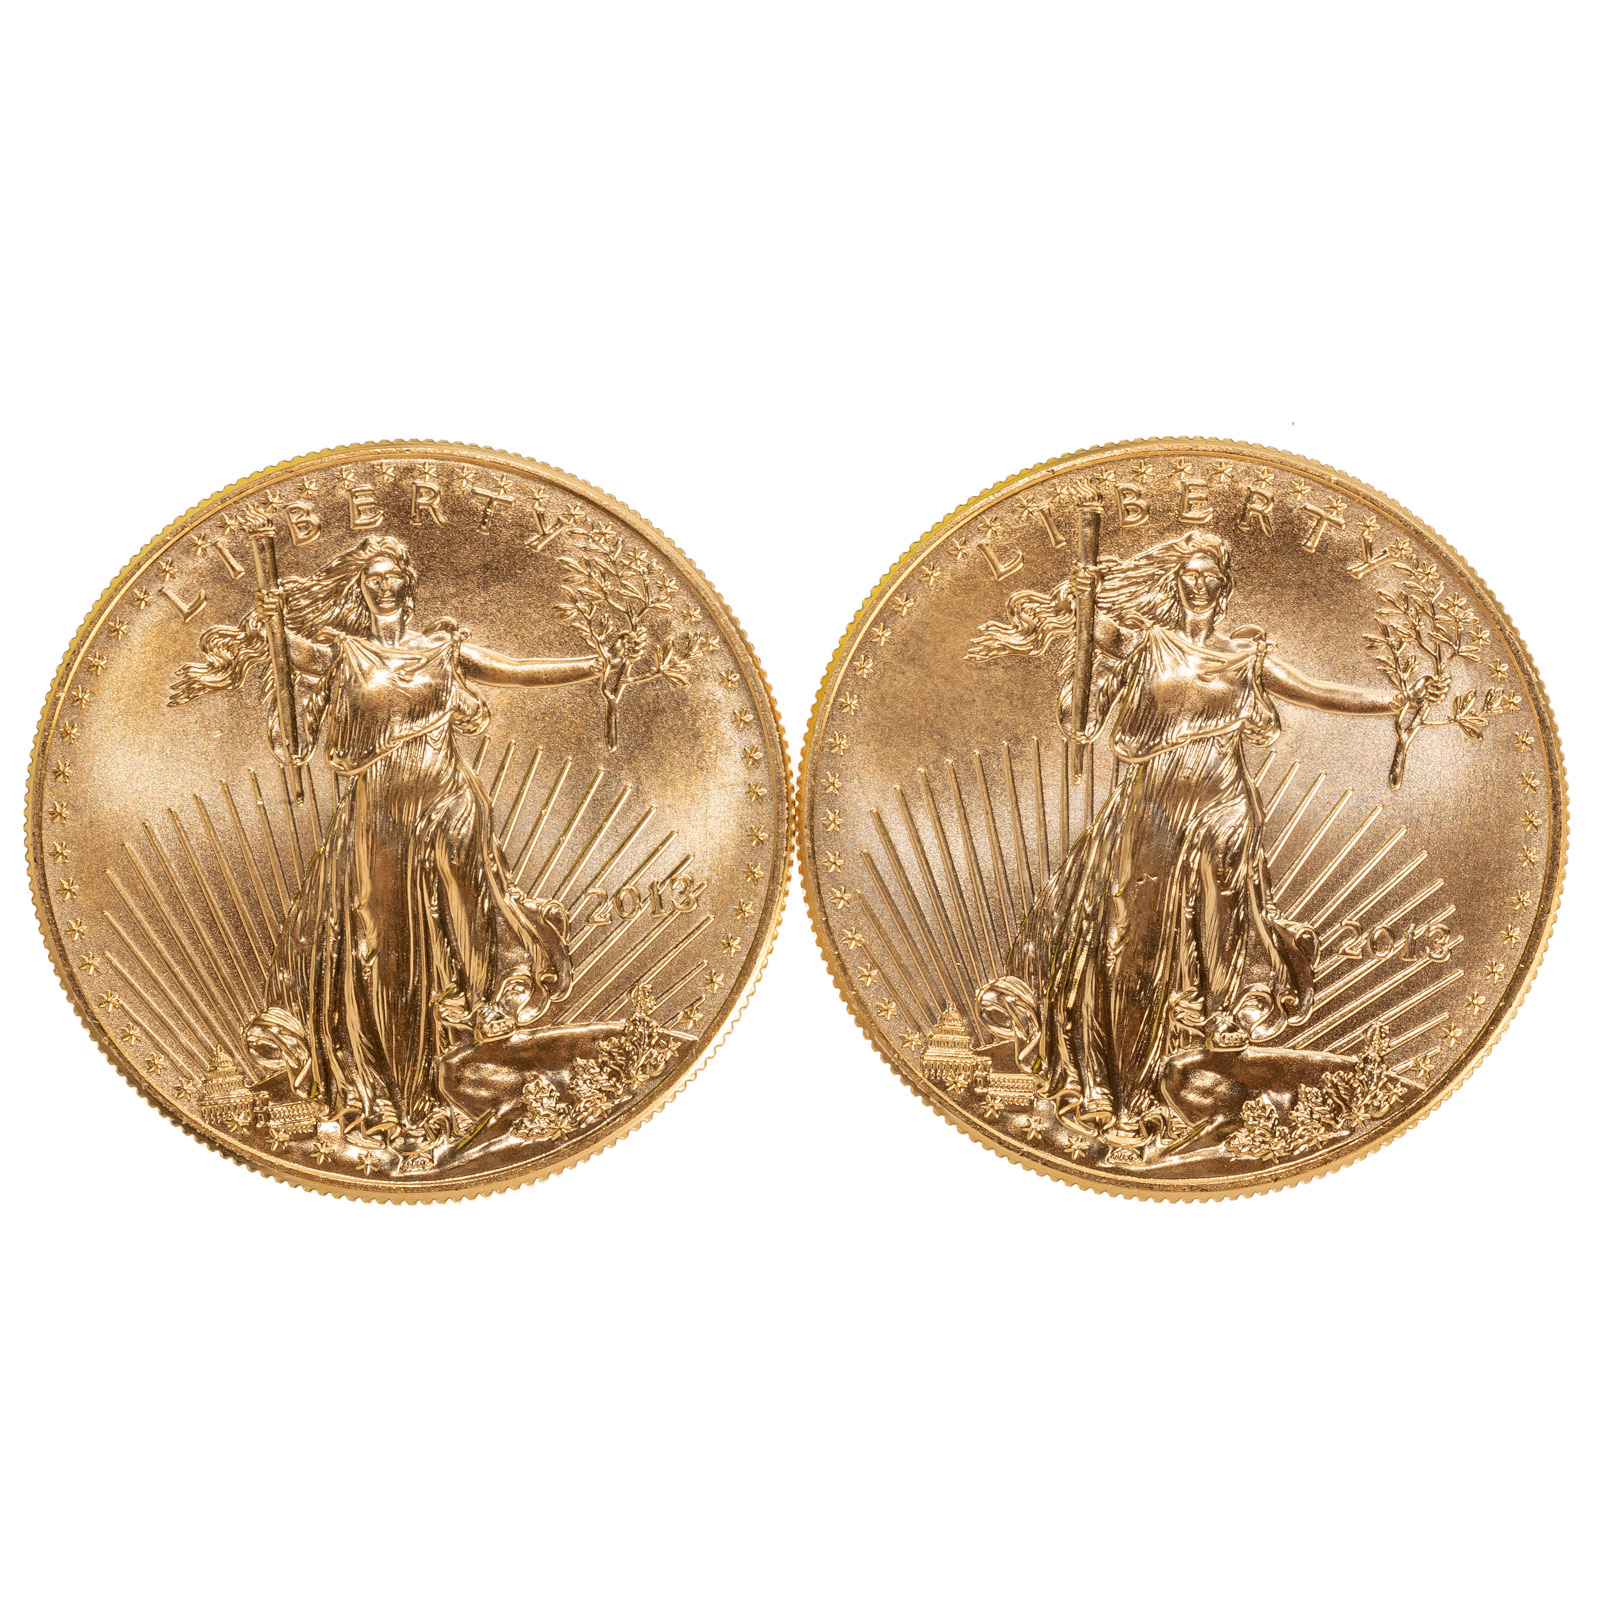 A PAIR OF 2013 1 OUNCE GOLD AMERICAN 287a2a